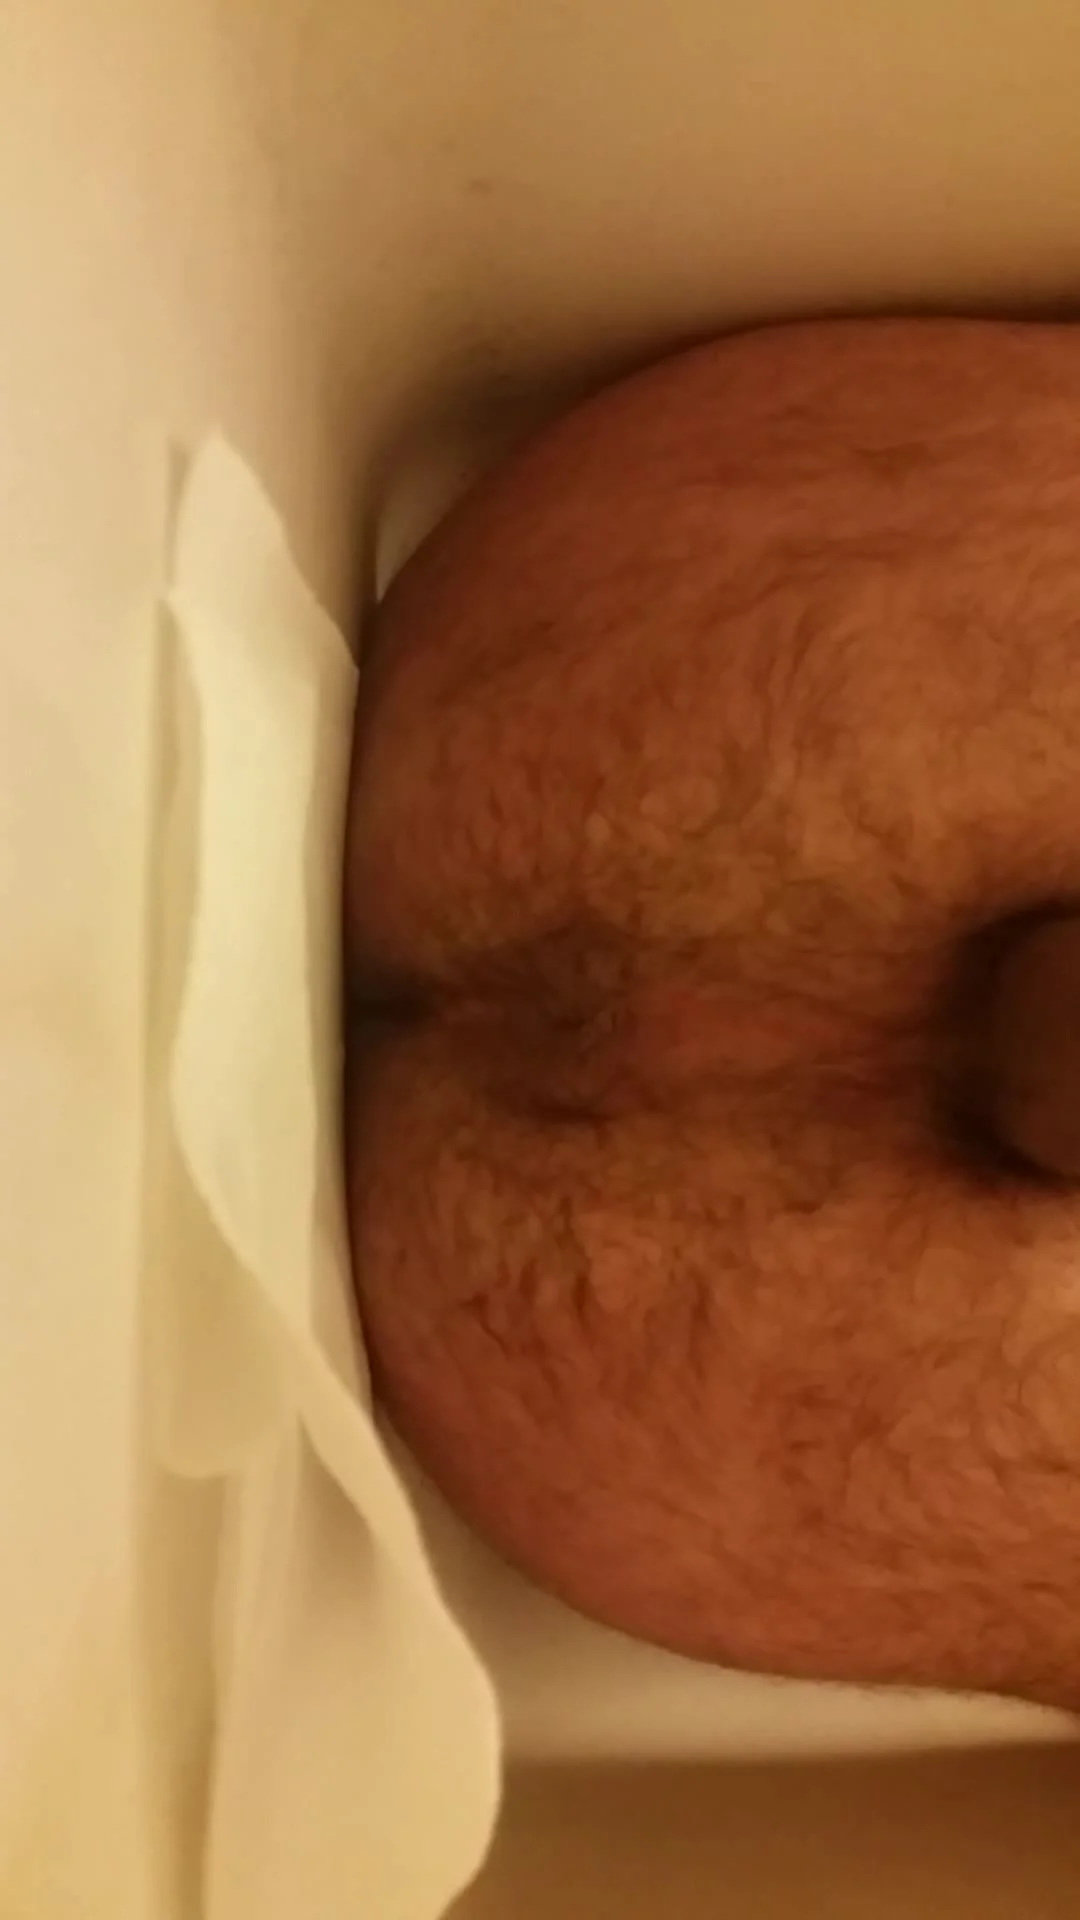 Hairy Ass Poo Gay Scat Porn At Thisvid Tube